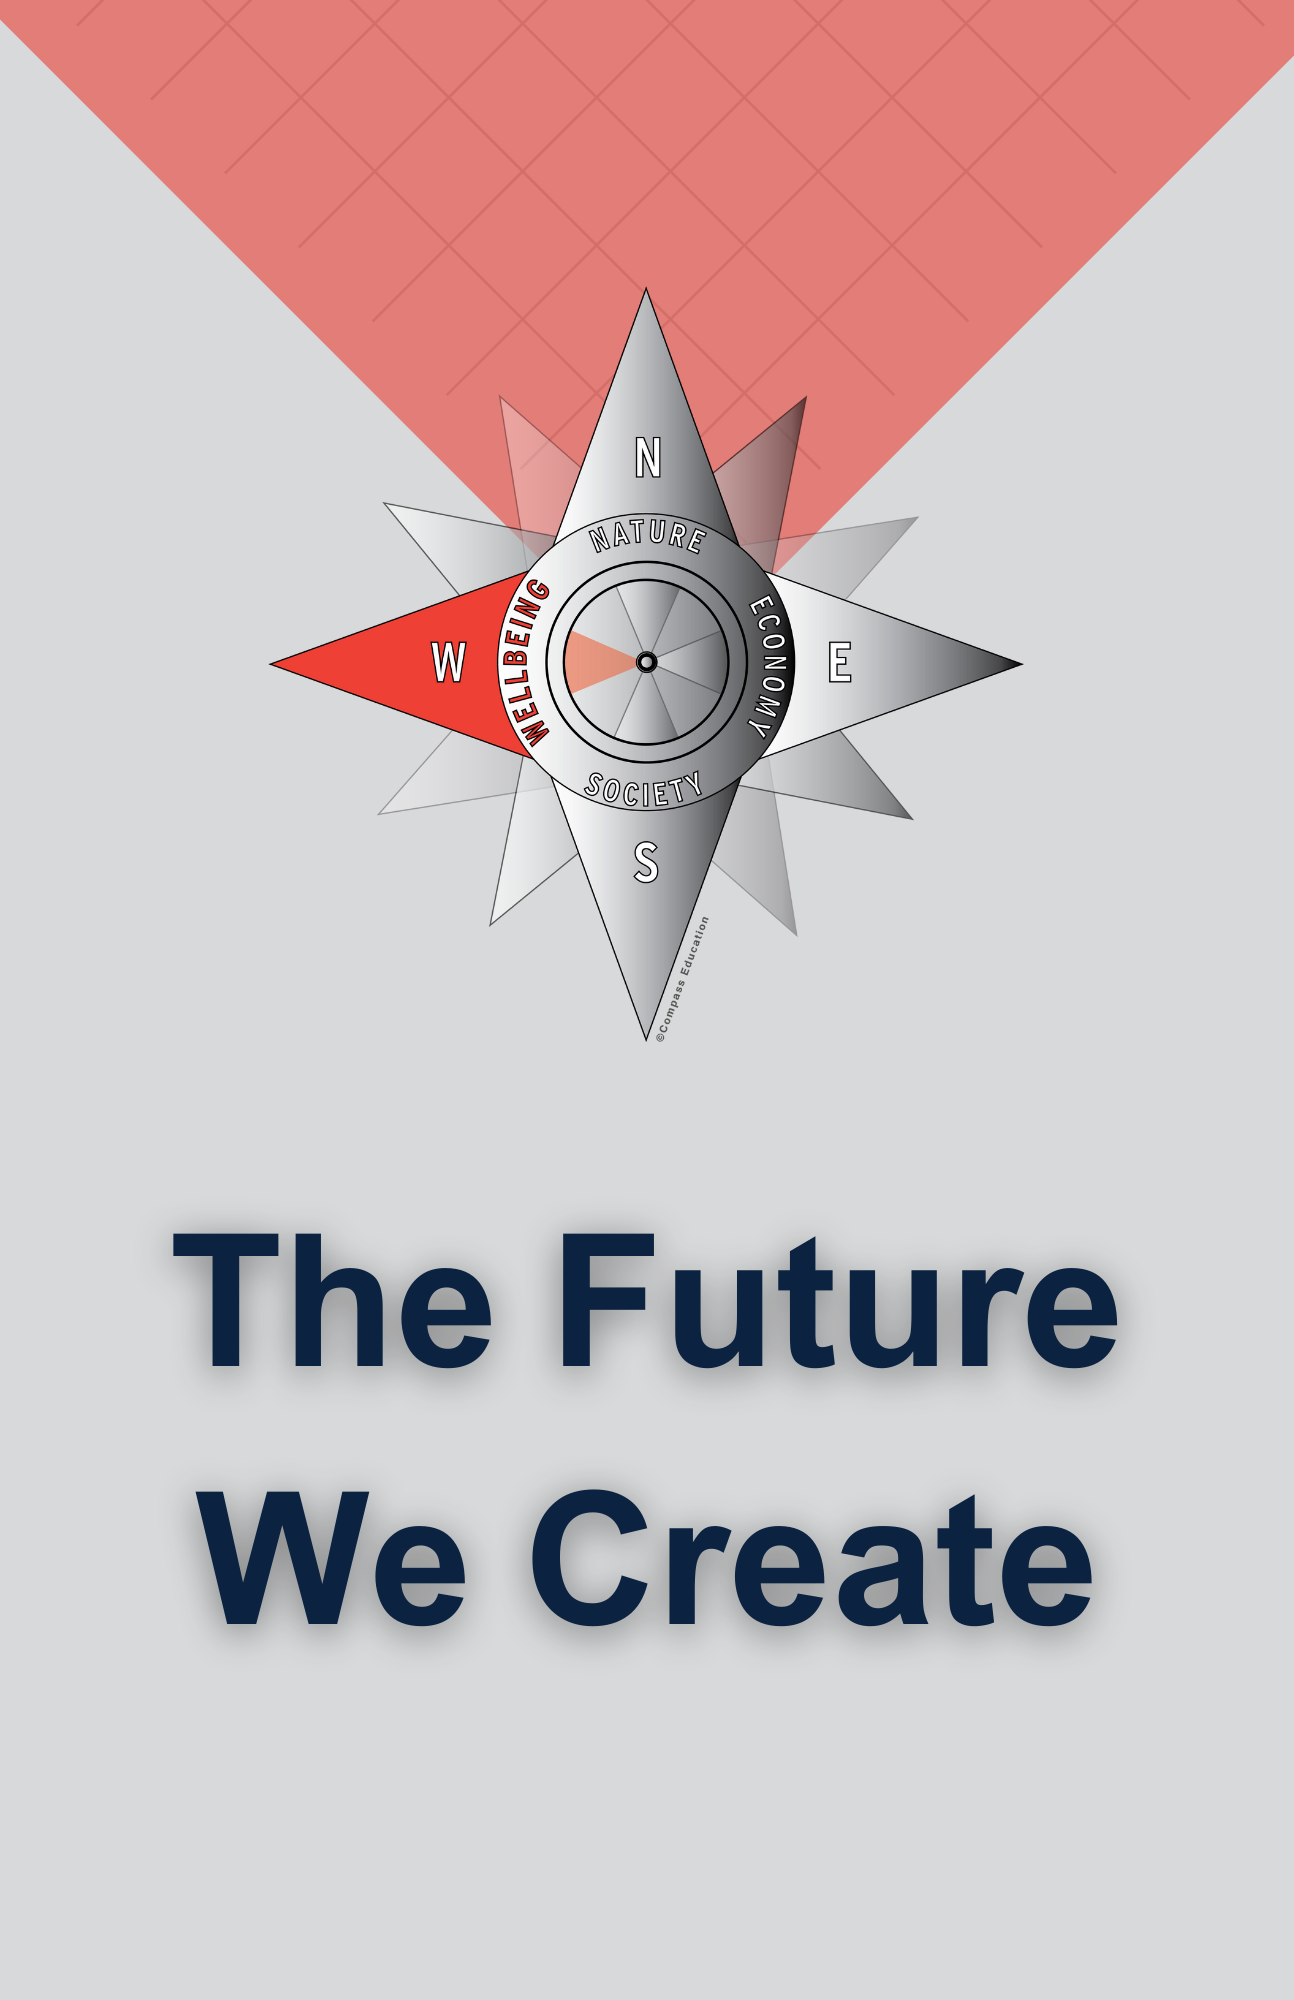 Sustainability compass with the "W" highlighted red to emphasize "wellbeing", text below that says "the future we create"